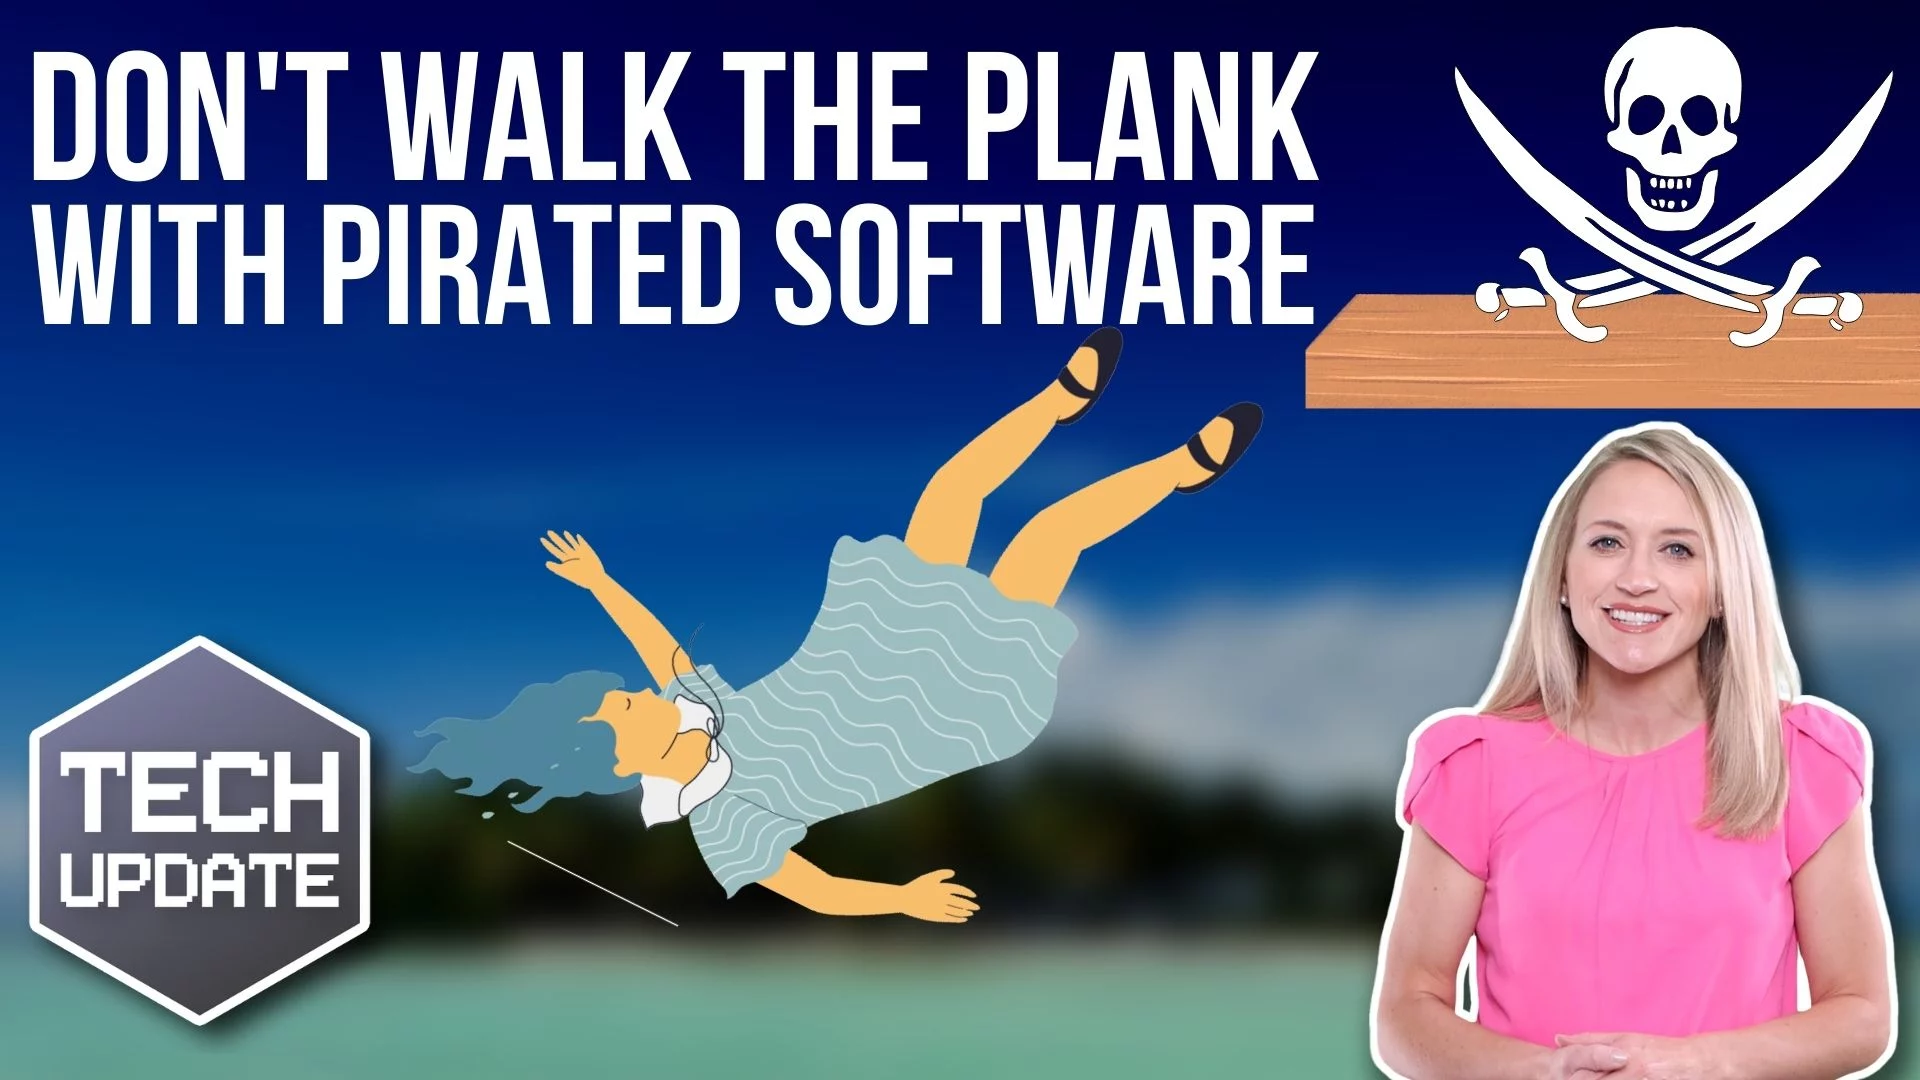 Don't walk the plank with pirated software.